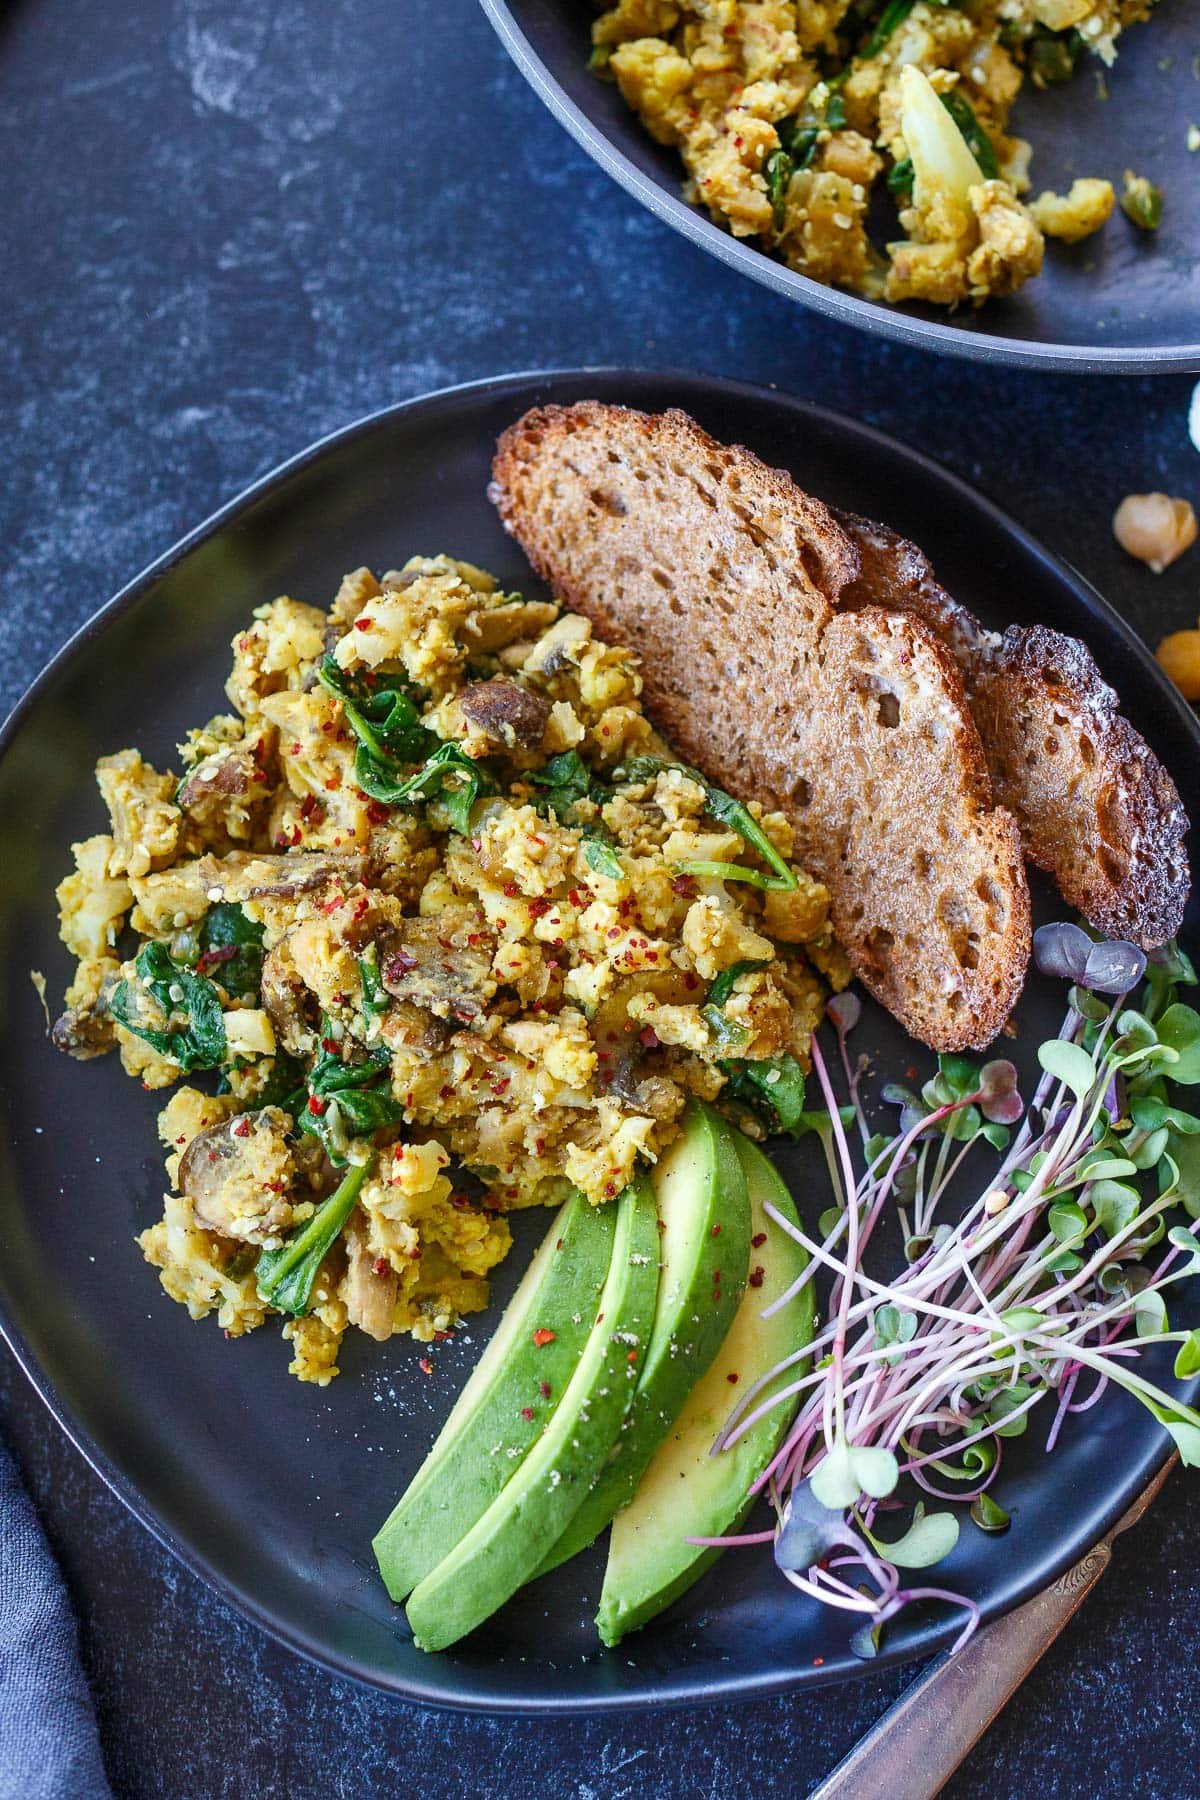 breakfast plate with chickpea scramble, toast, avocado slices, and microgreens.